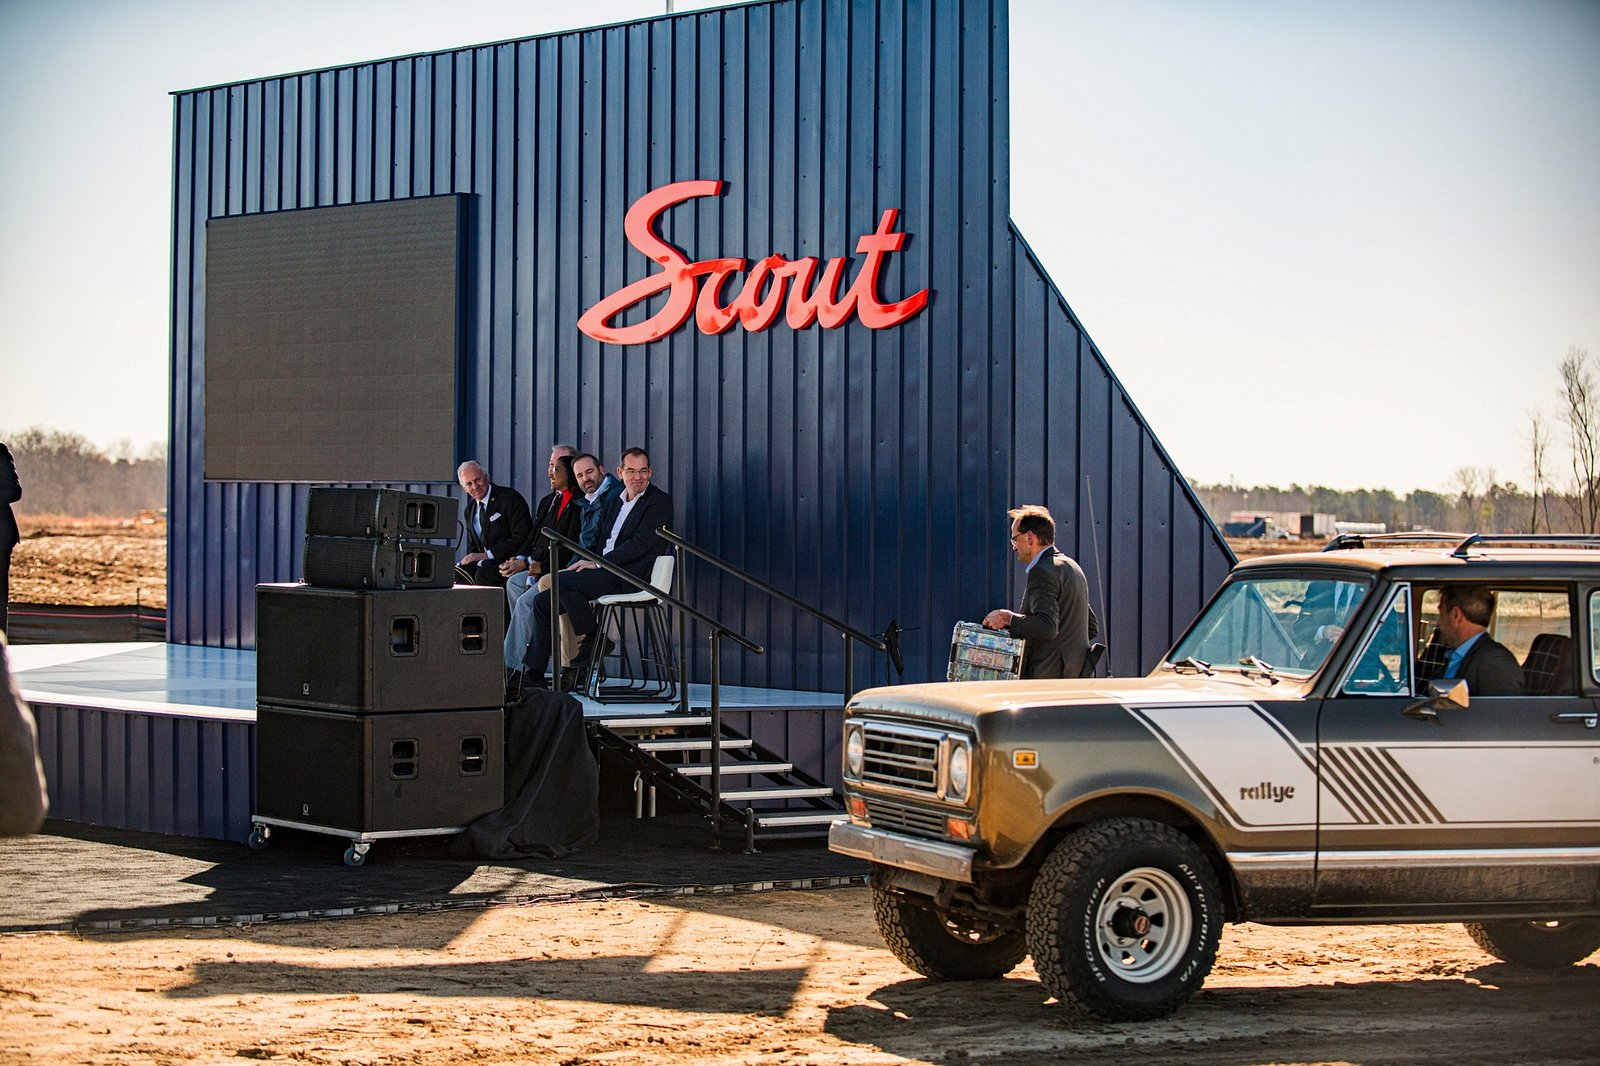 Scout Motors Production Facility Breaks Ground In South Carolina